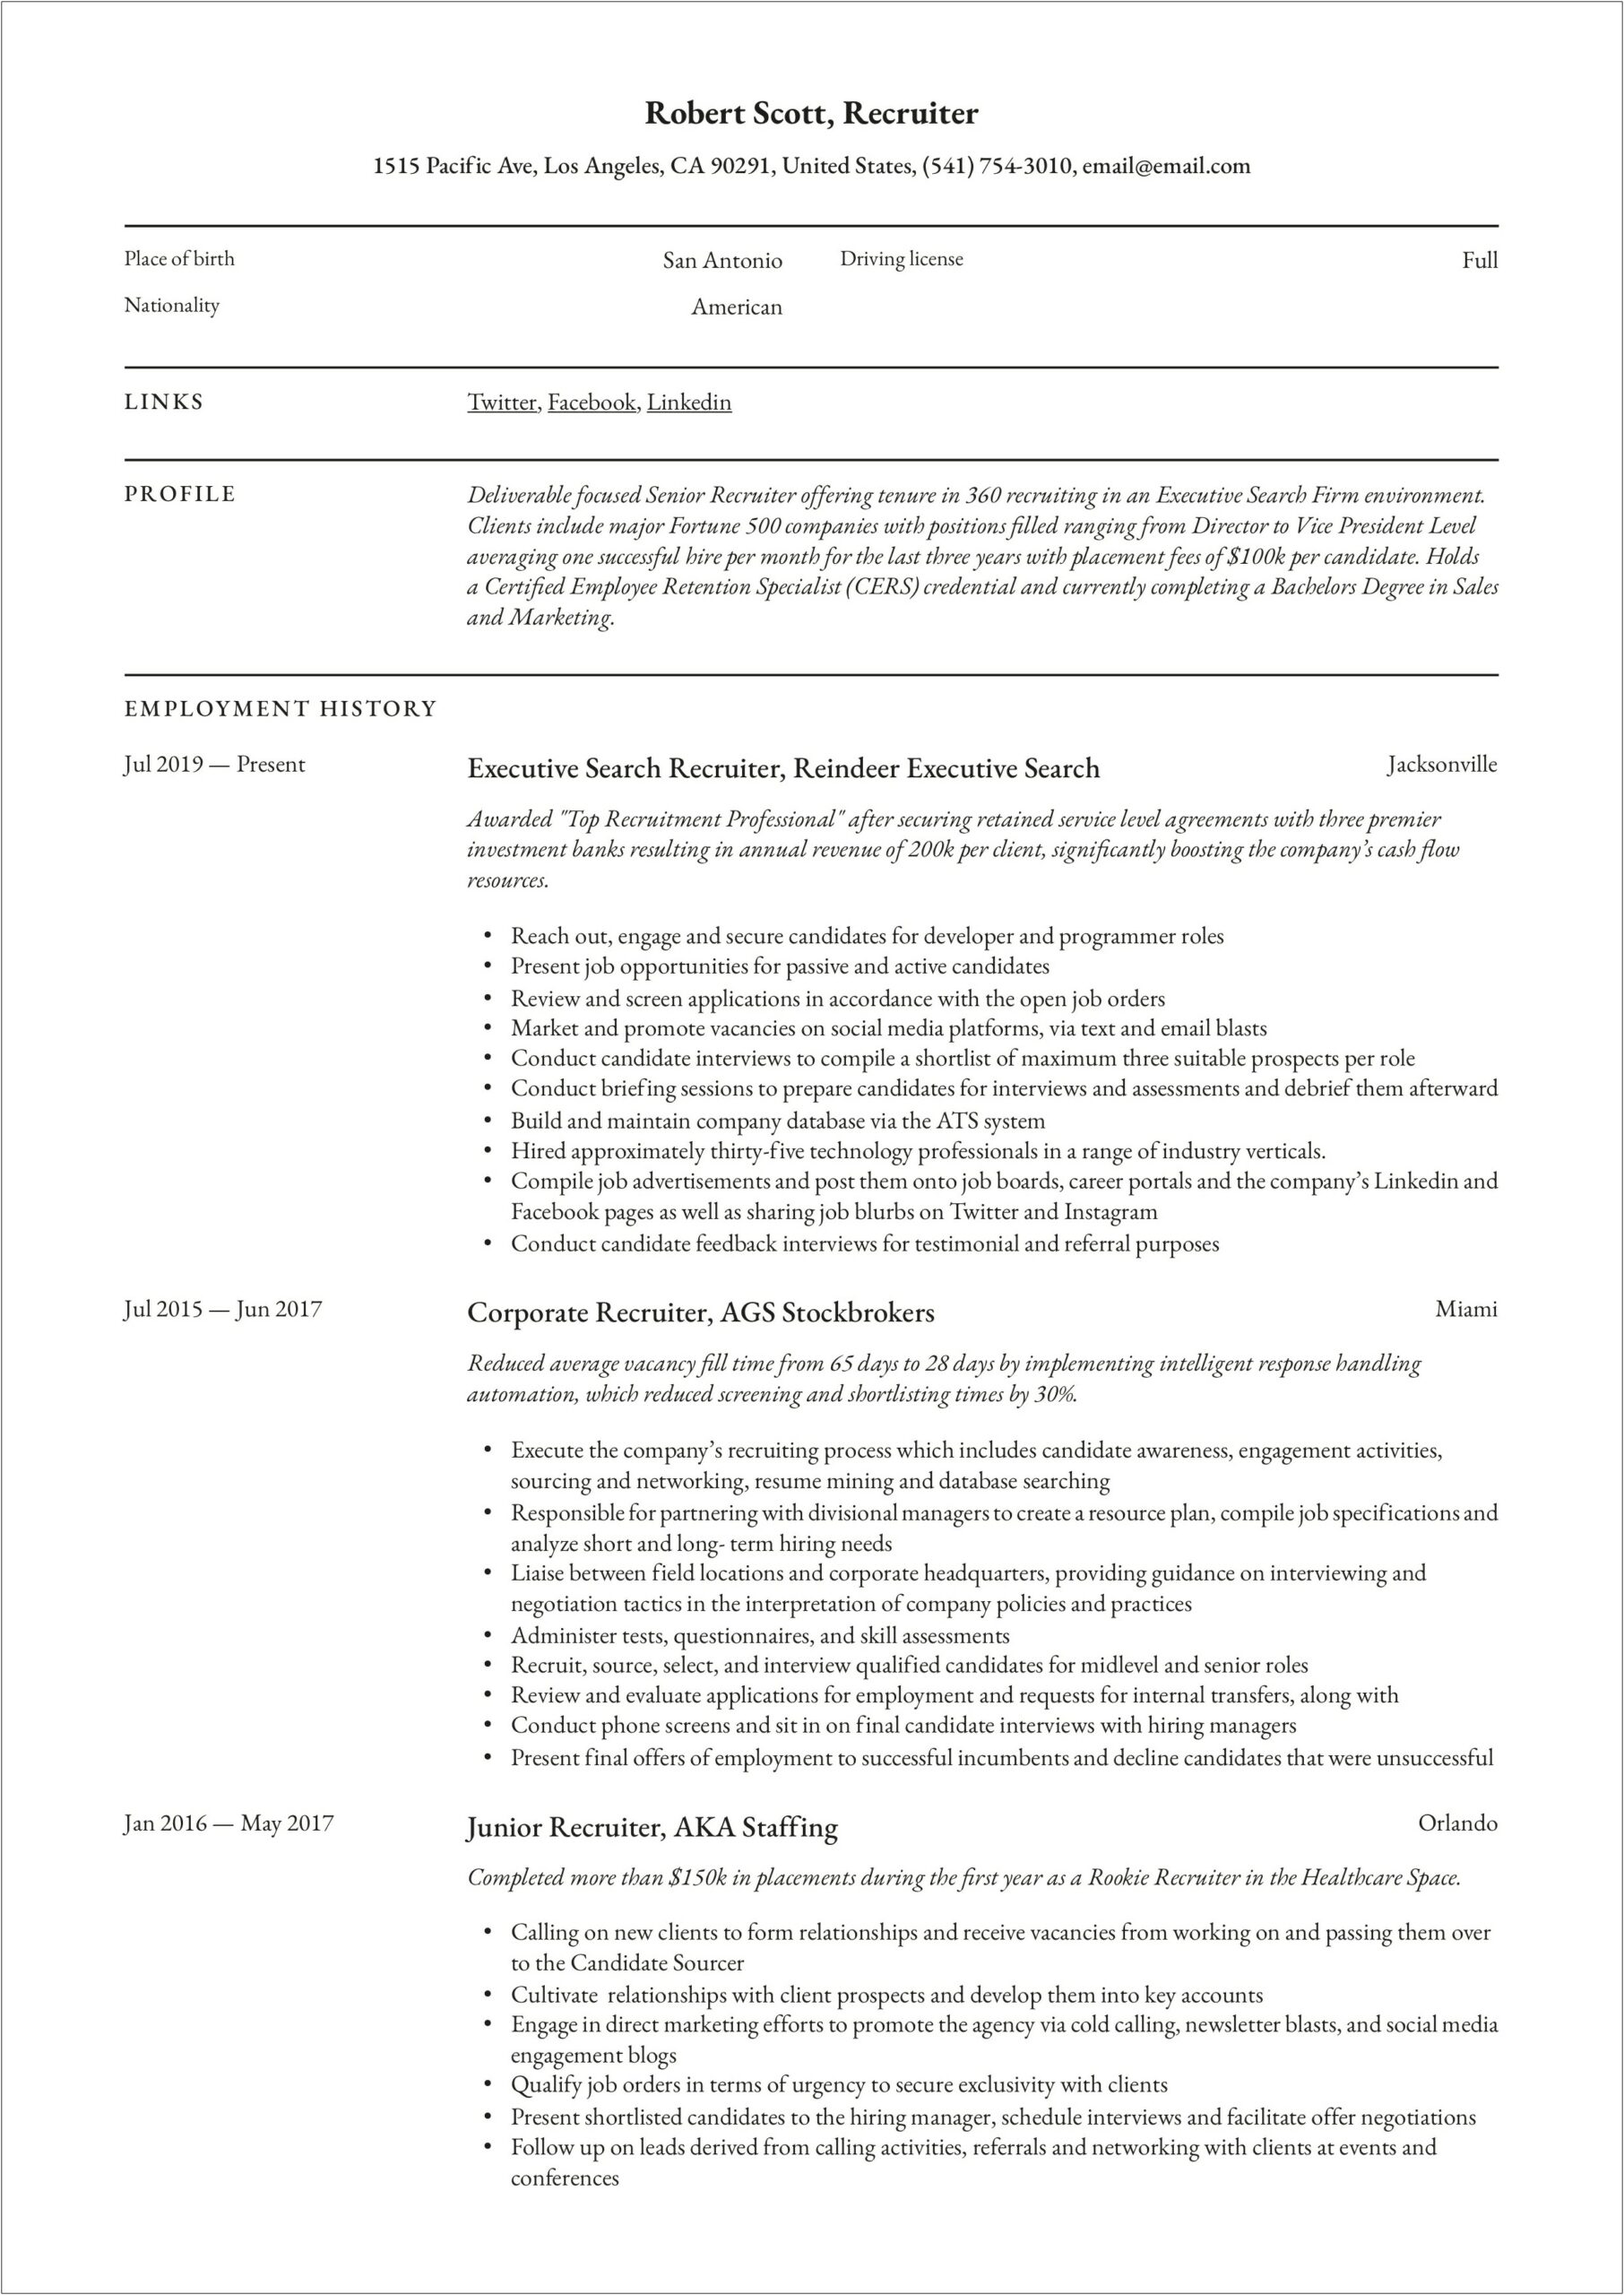 Examples Of Measurable Results On A Resume